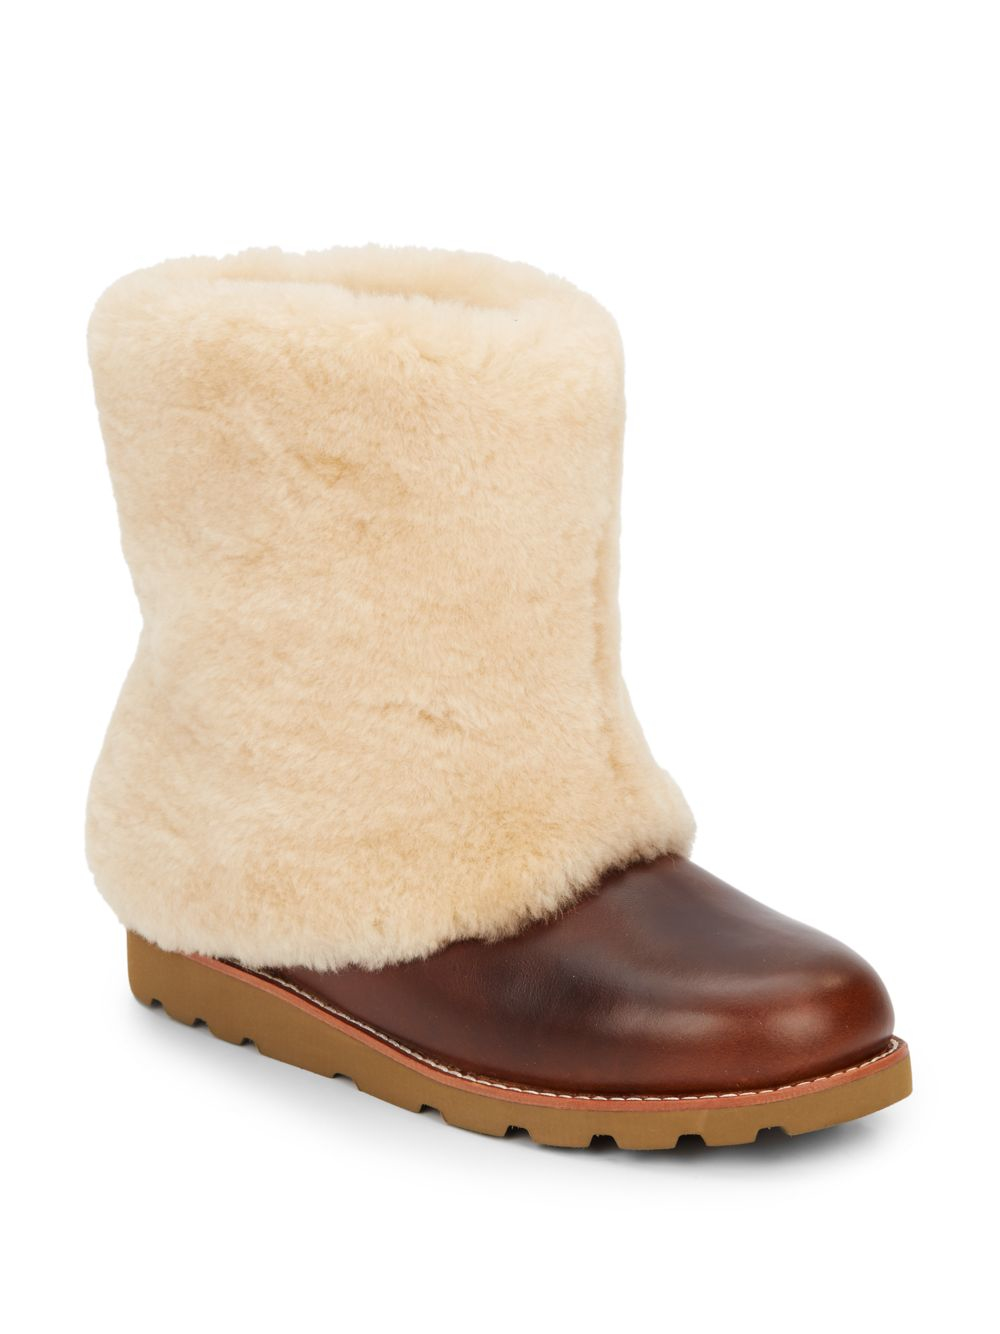 UGG Maylin Leather & Lamb Shearling Boots in Chestnut (Brown) - Lyst